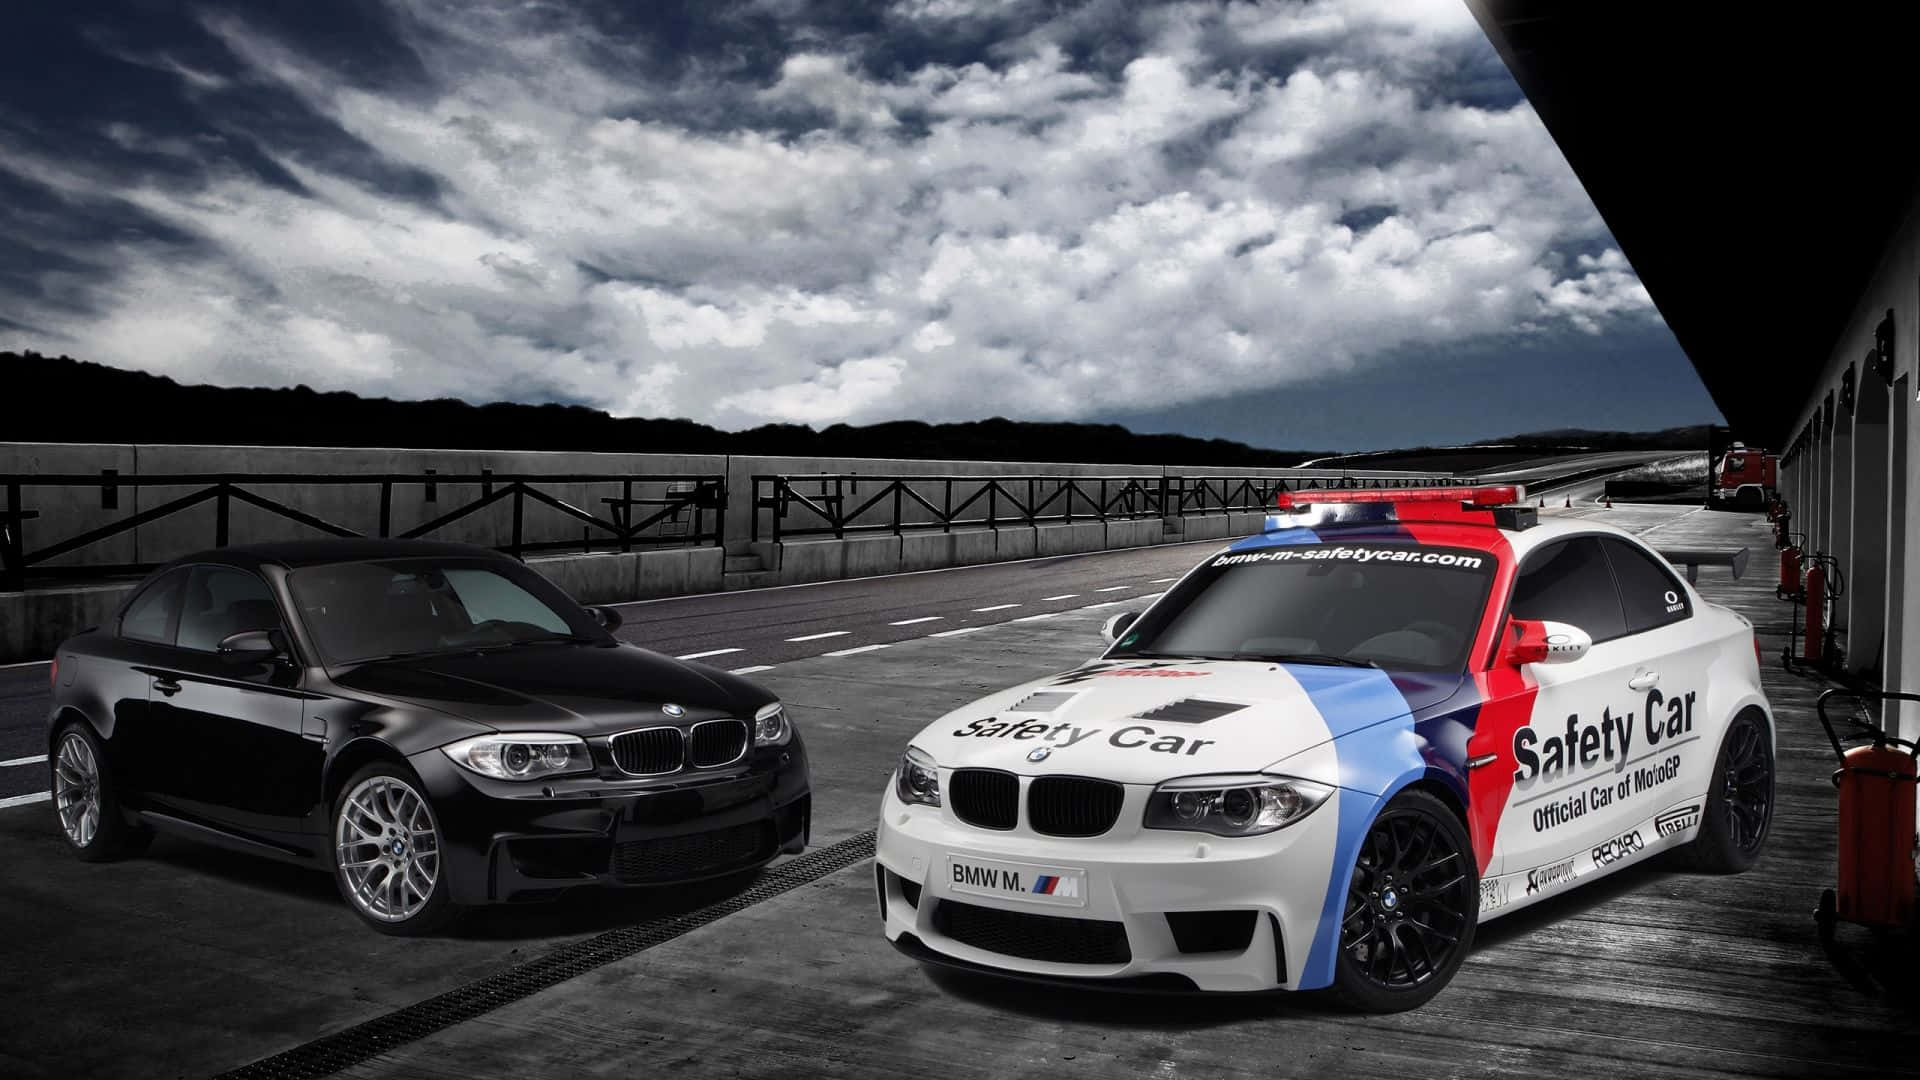 720p M Series Background Black And A Safety Car 2011 Bmw 1m